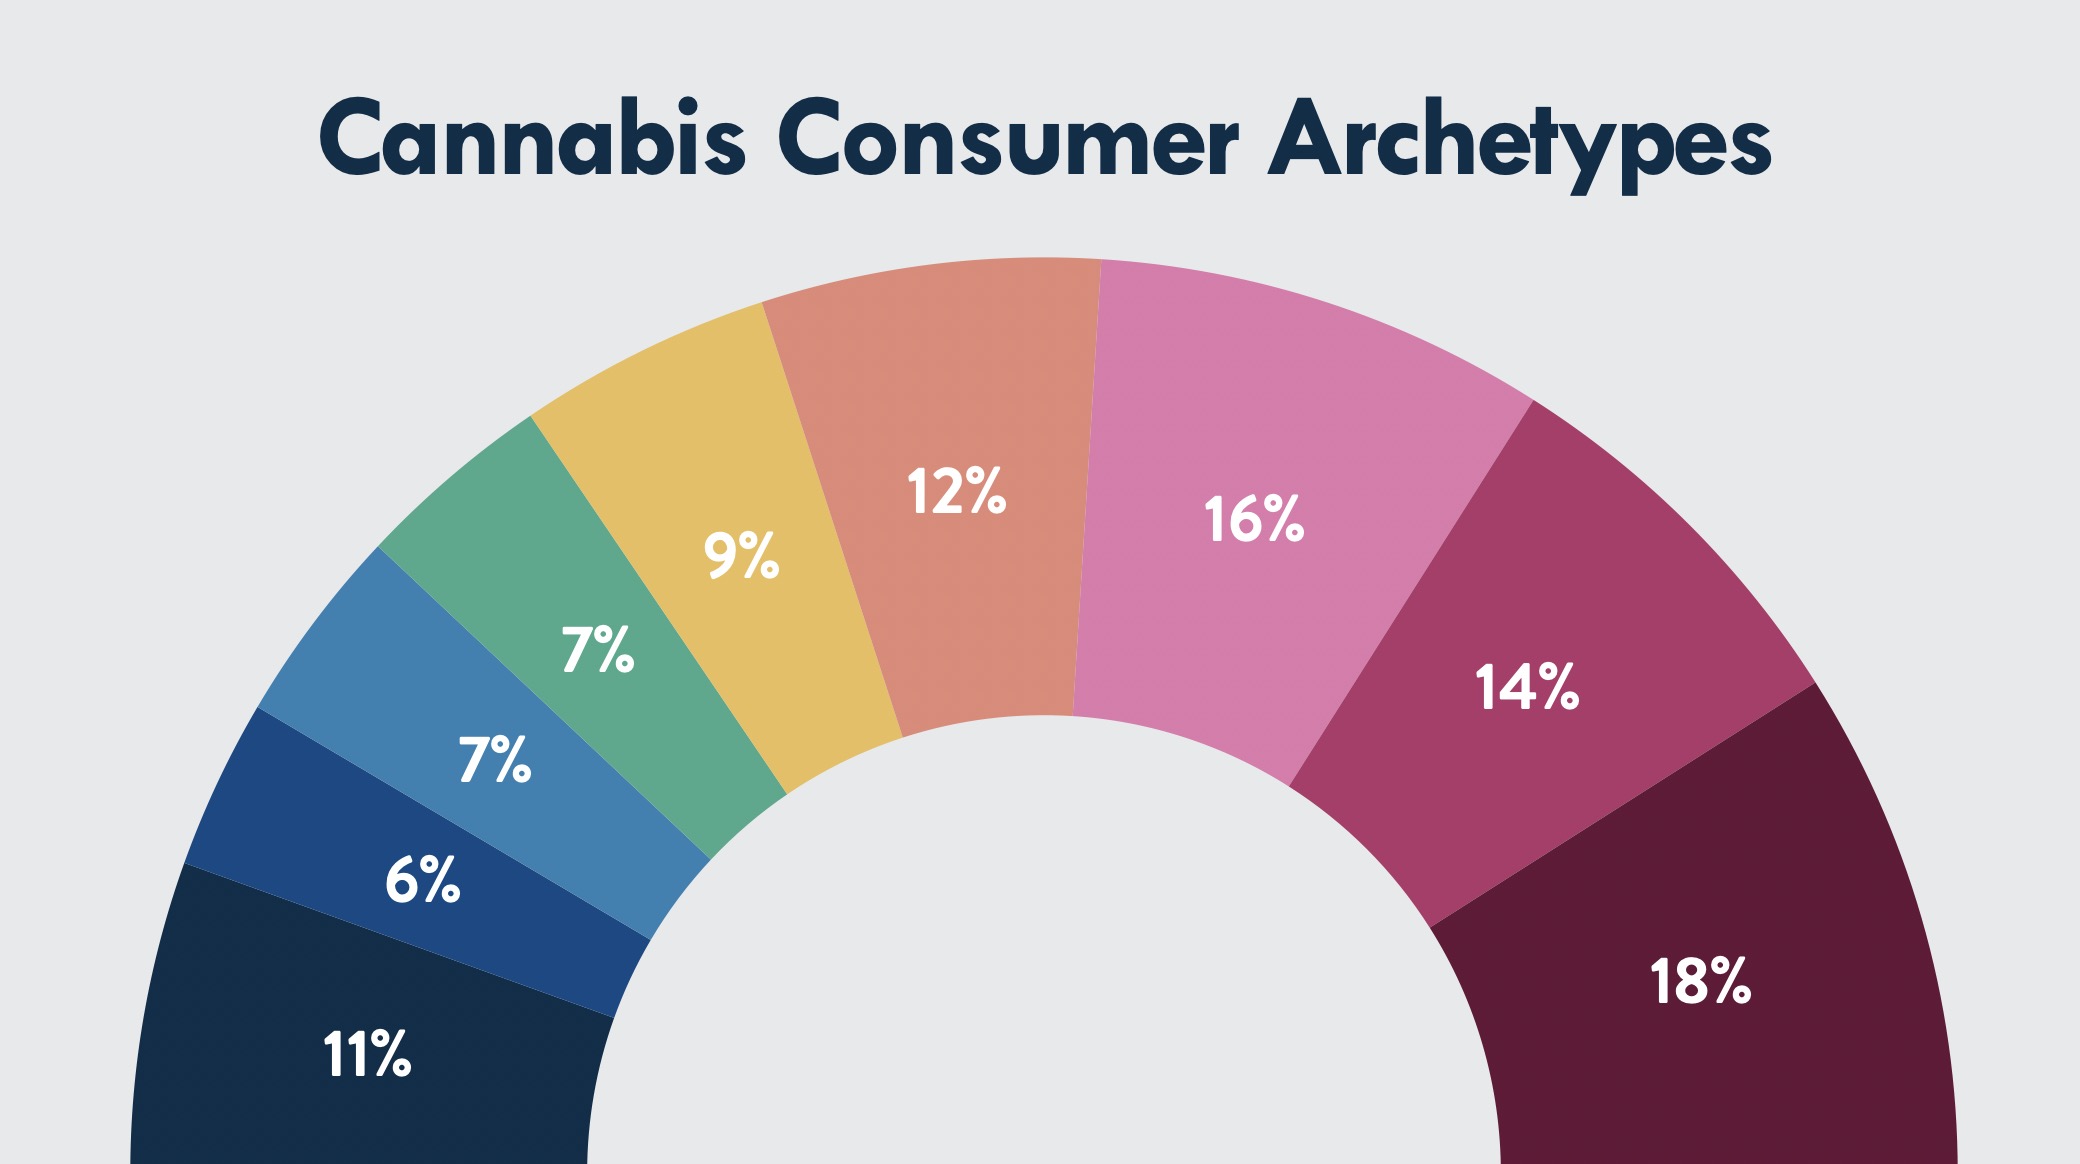 Cannabis consumer market is fragmented